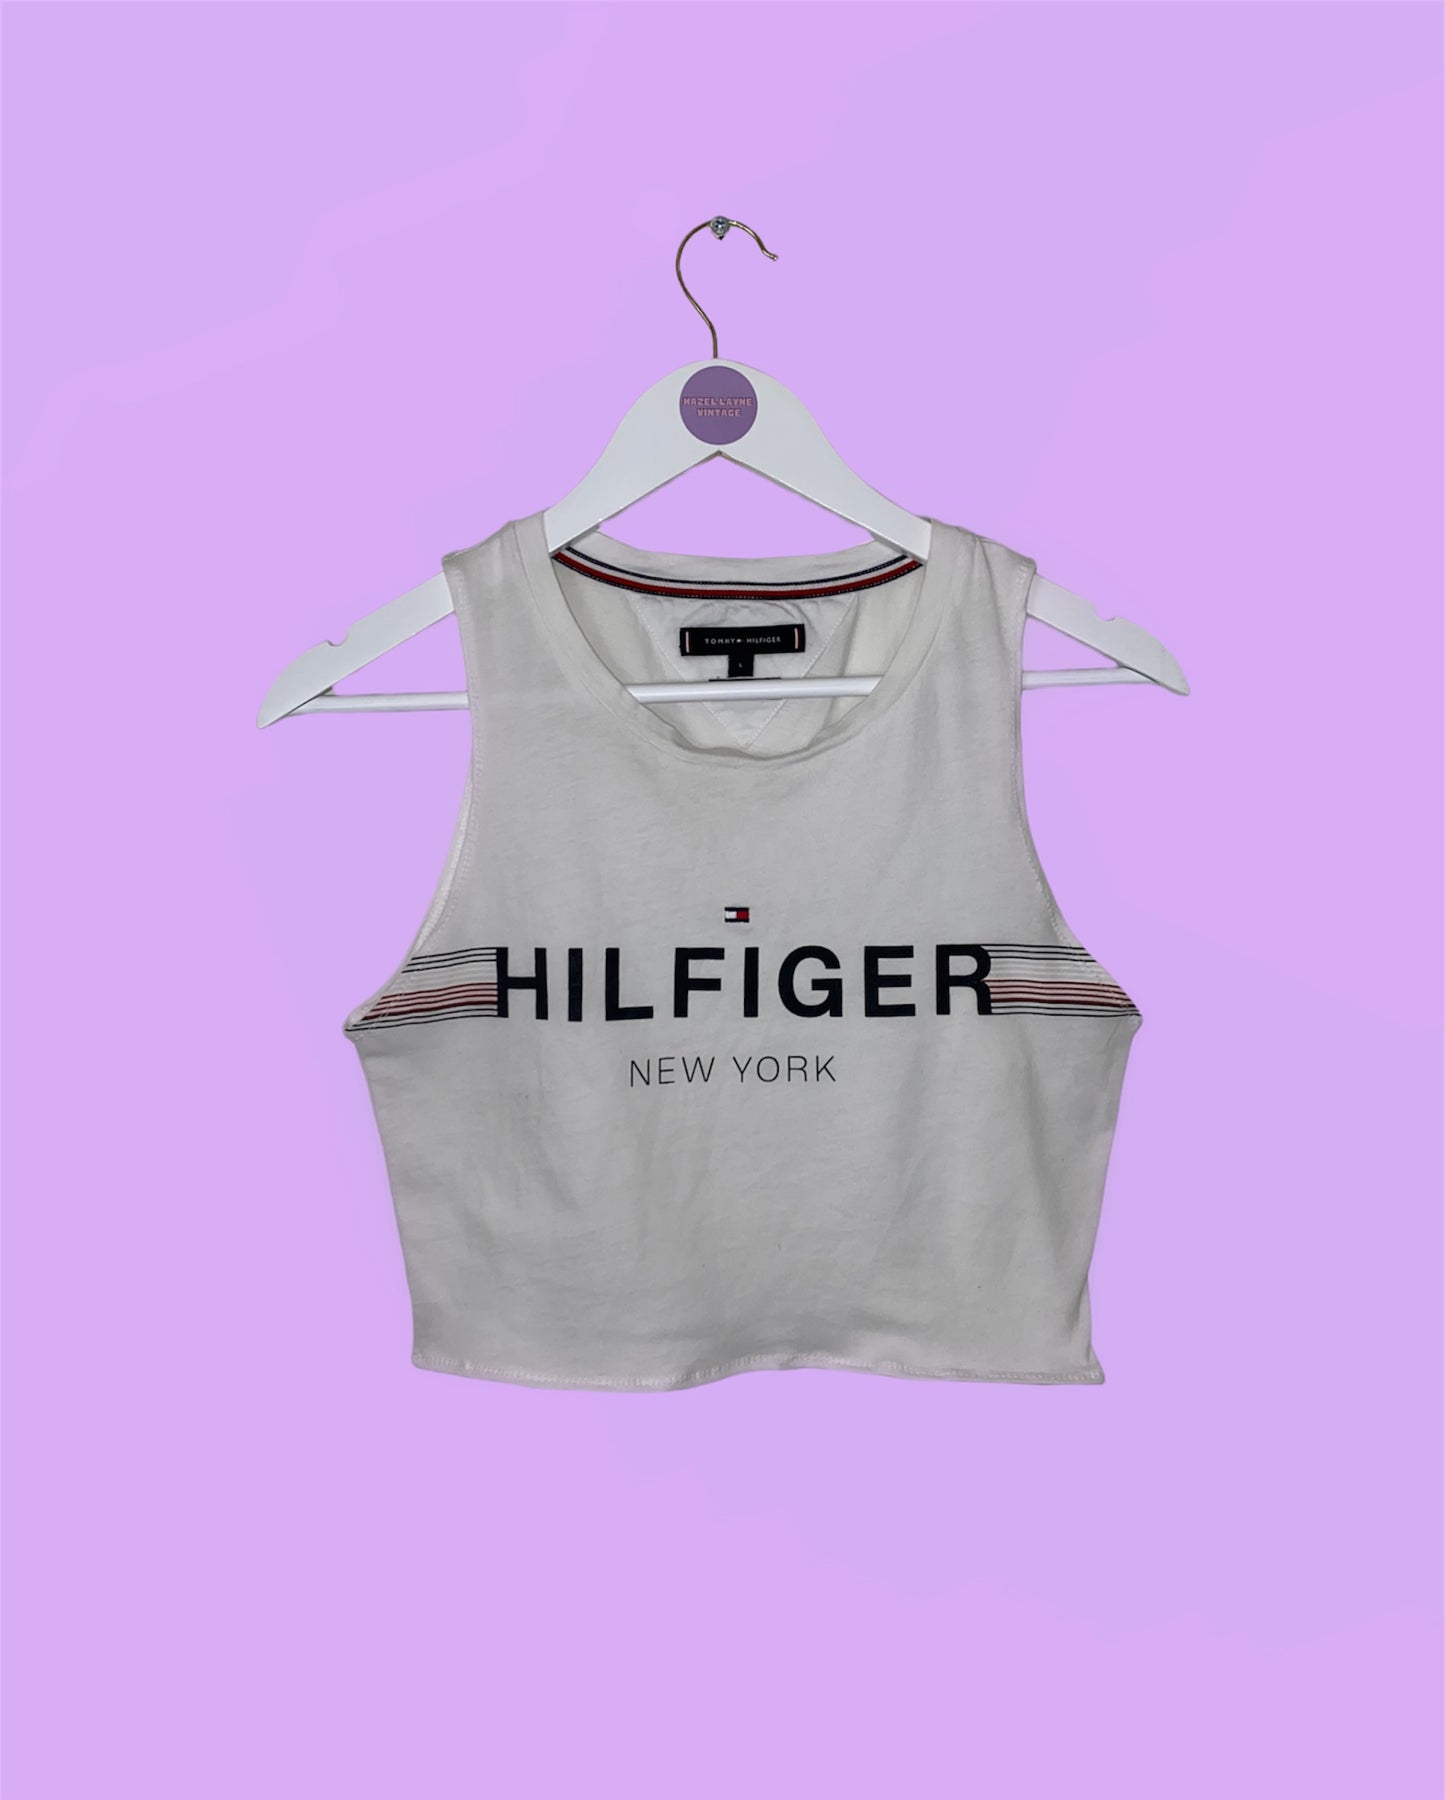 white sleeveless crop top with black hilfiger logo shown on a white clothes hanger on a lilac background